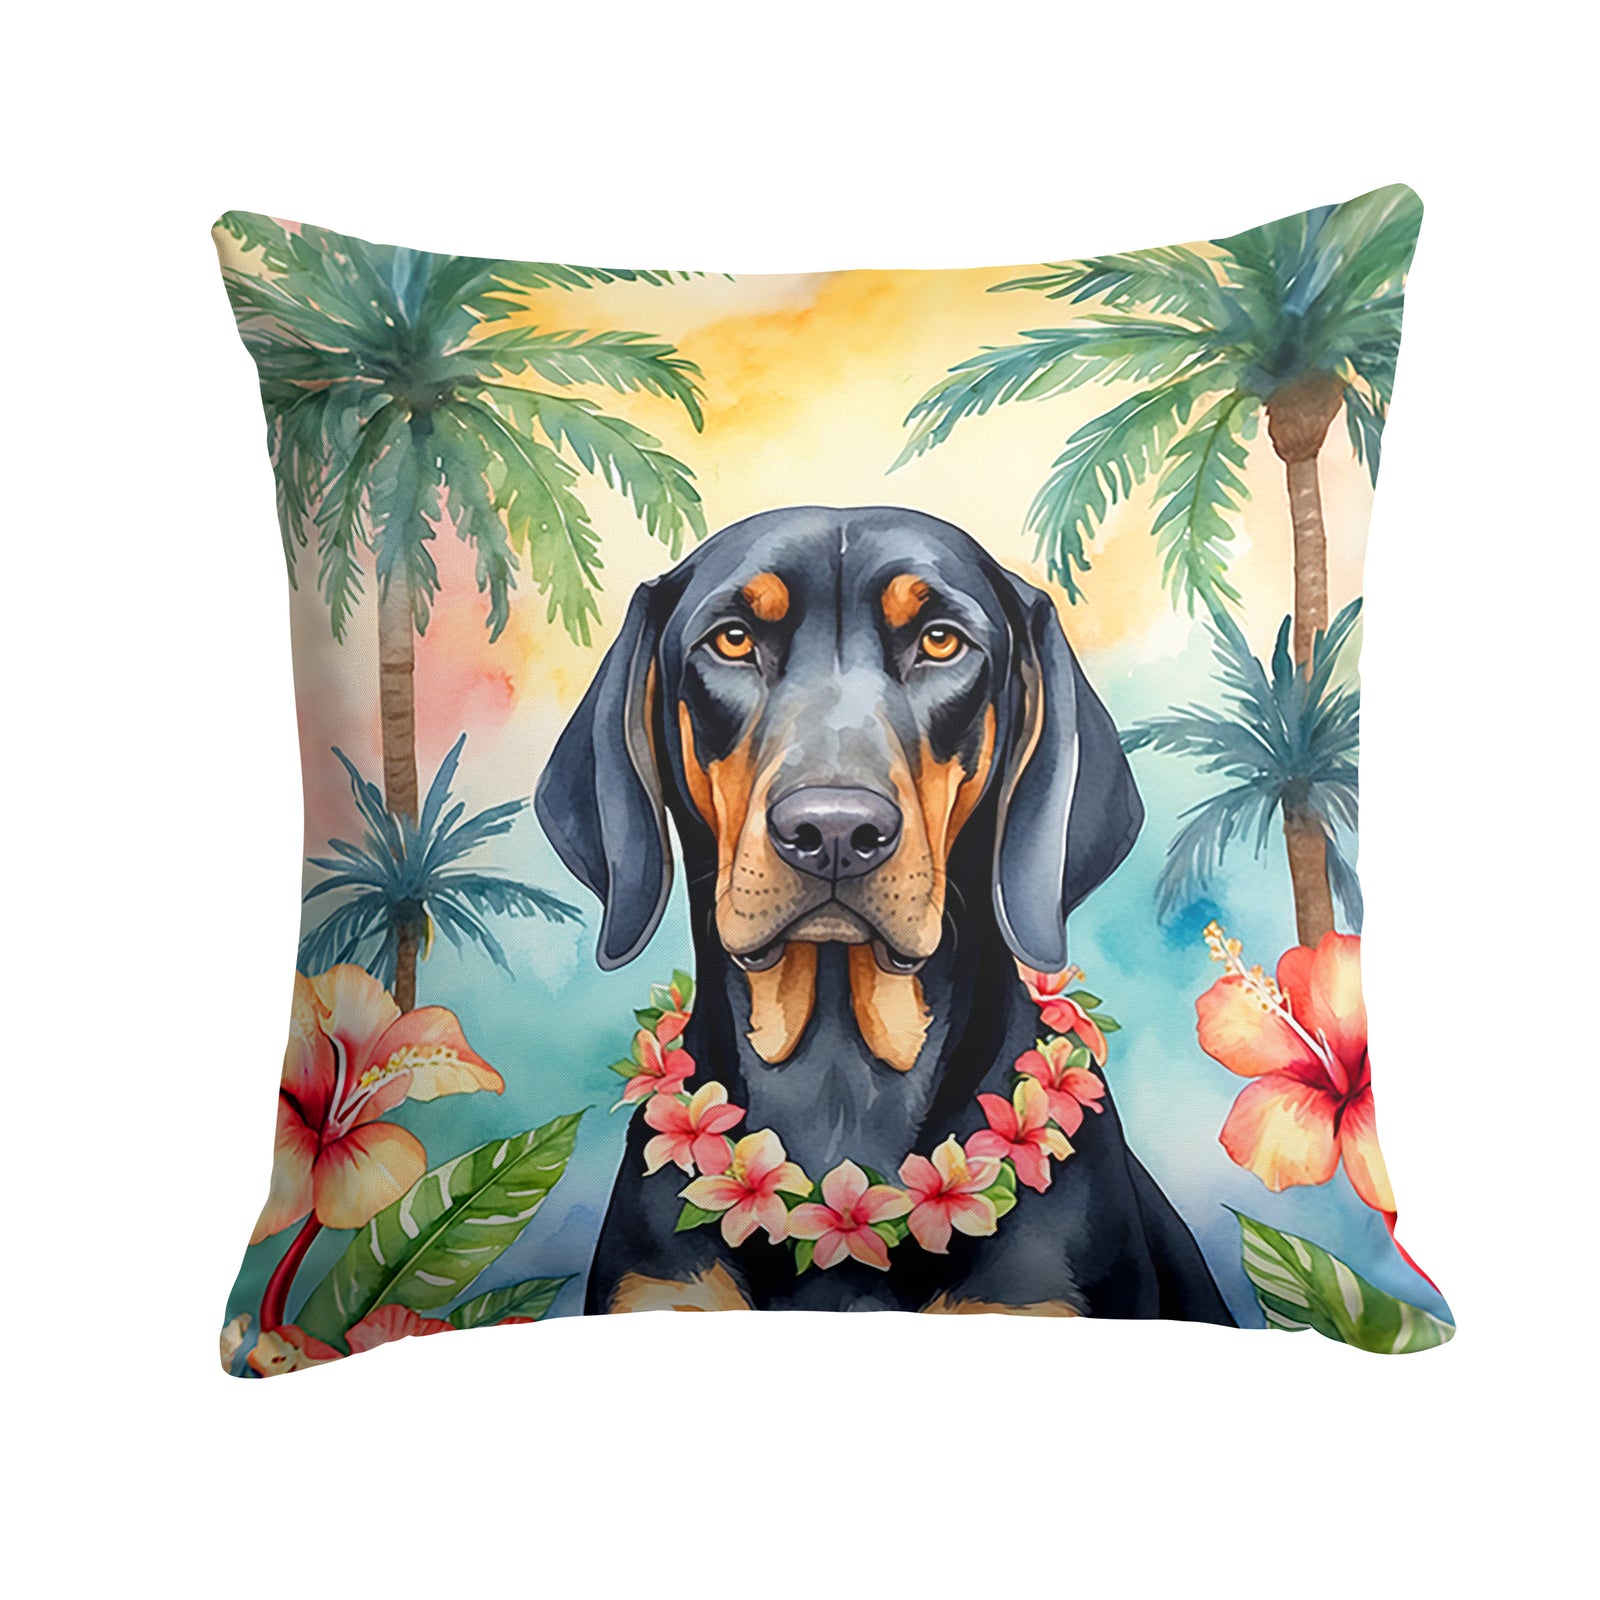 Buy this Black and Tan Coonhound Luau Throw Pillow